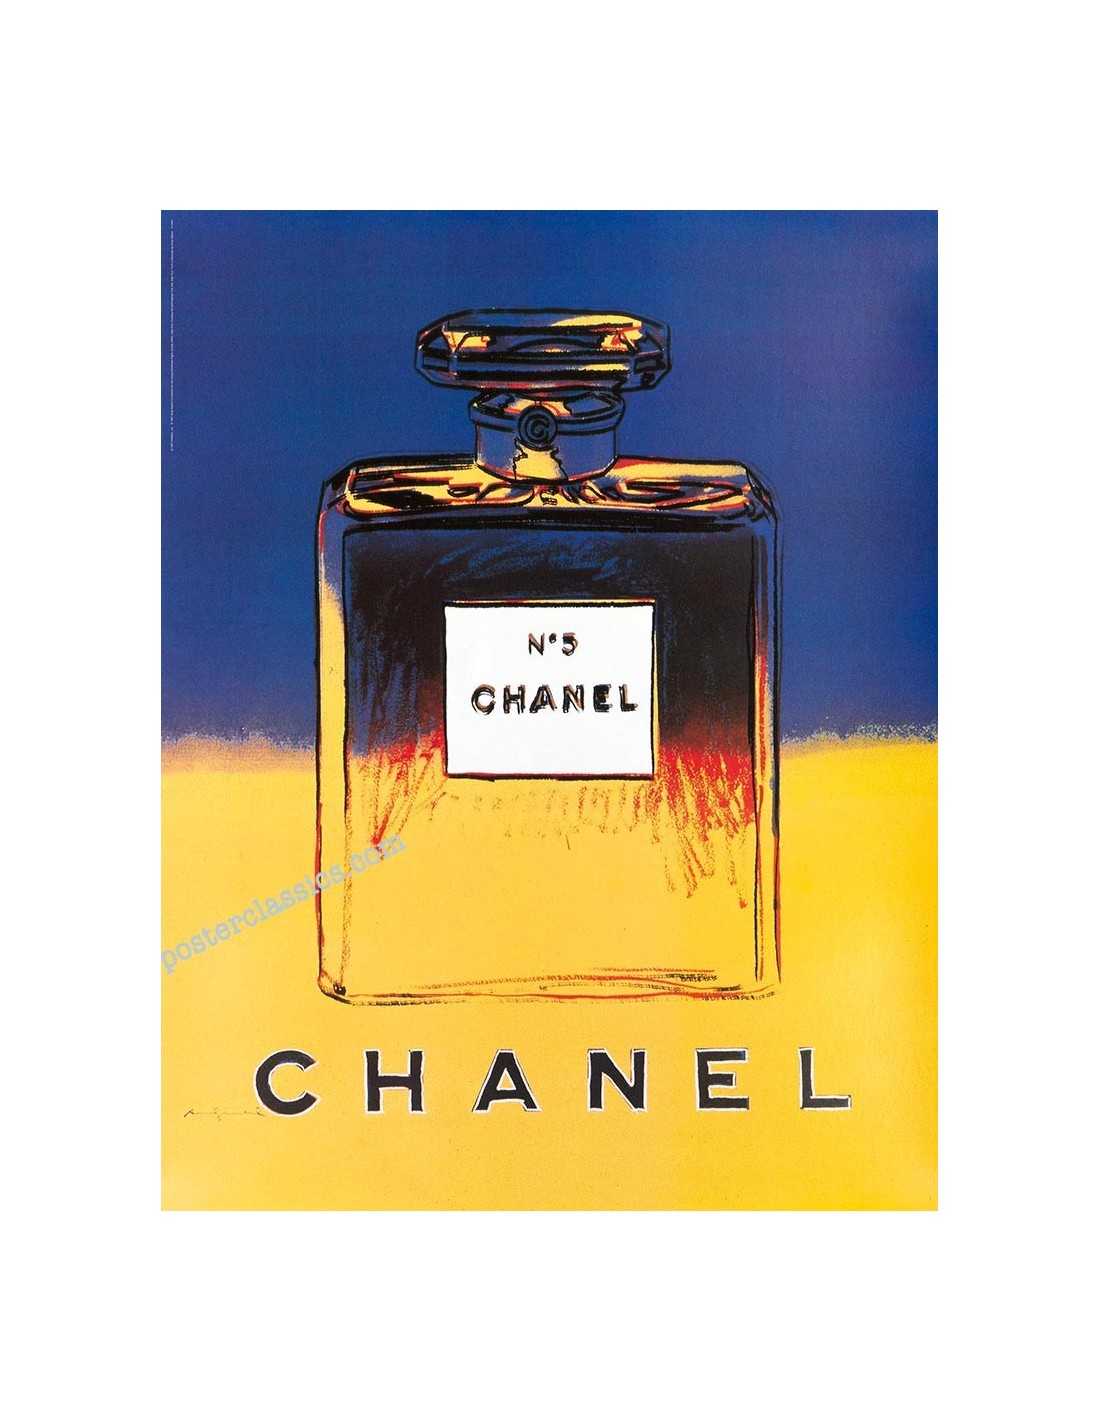 Andy Warhol Chanel N5 poster, Andy Warhol Popart poster, Andy